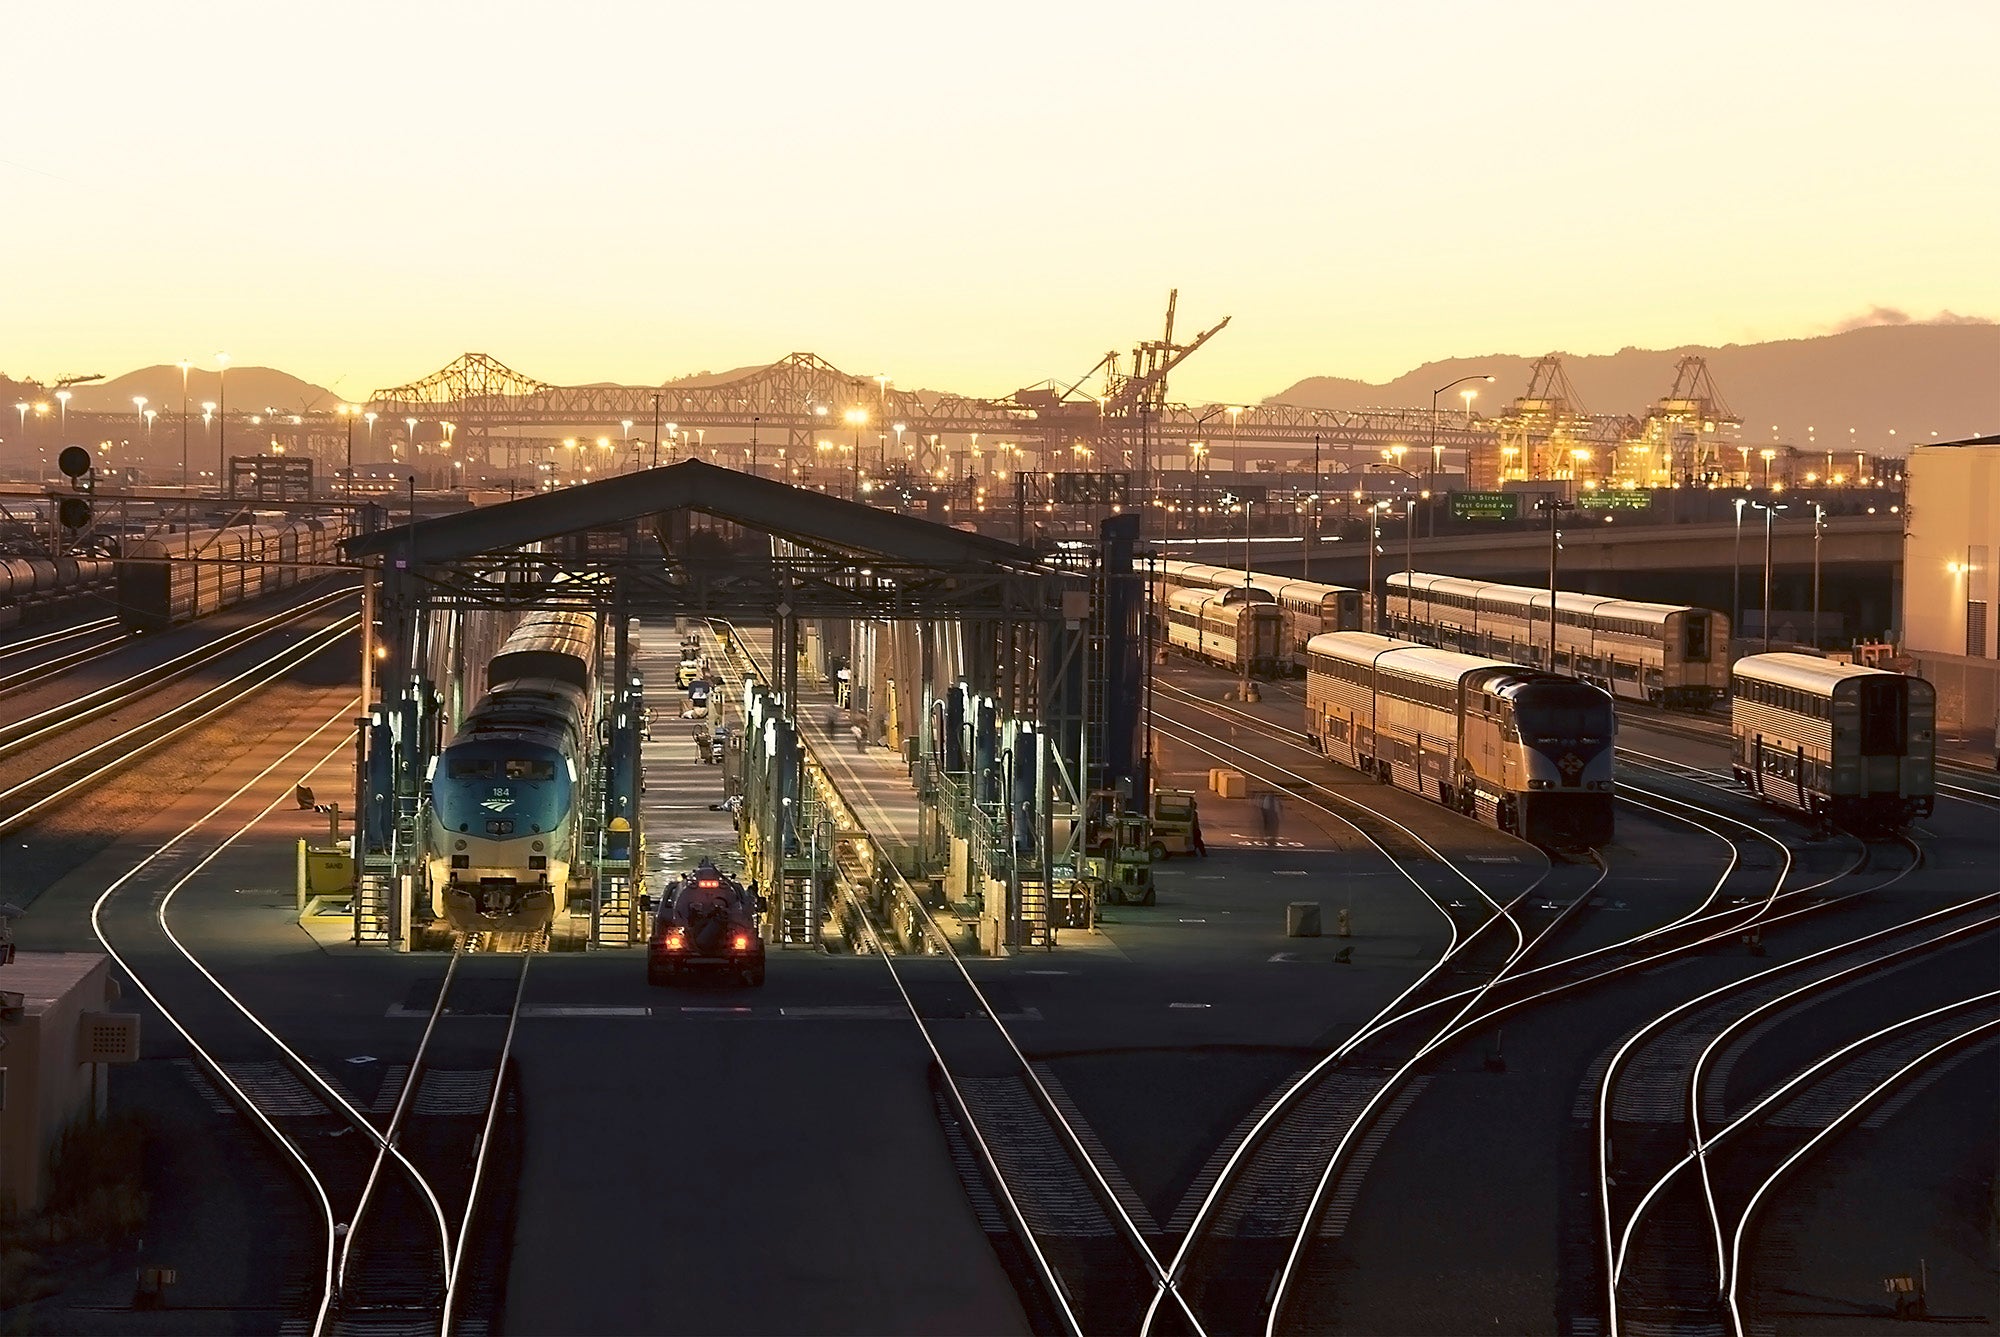 Photo taken at sunset with the Port of Oakland behind the trains.